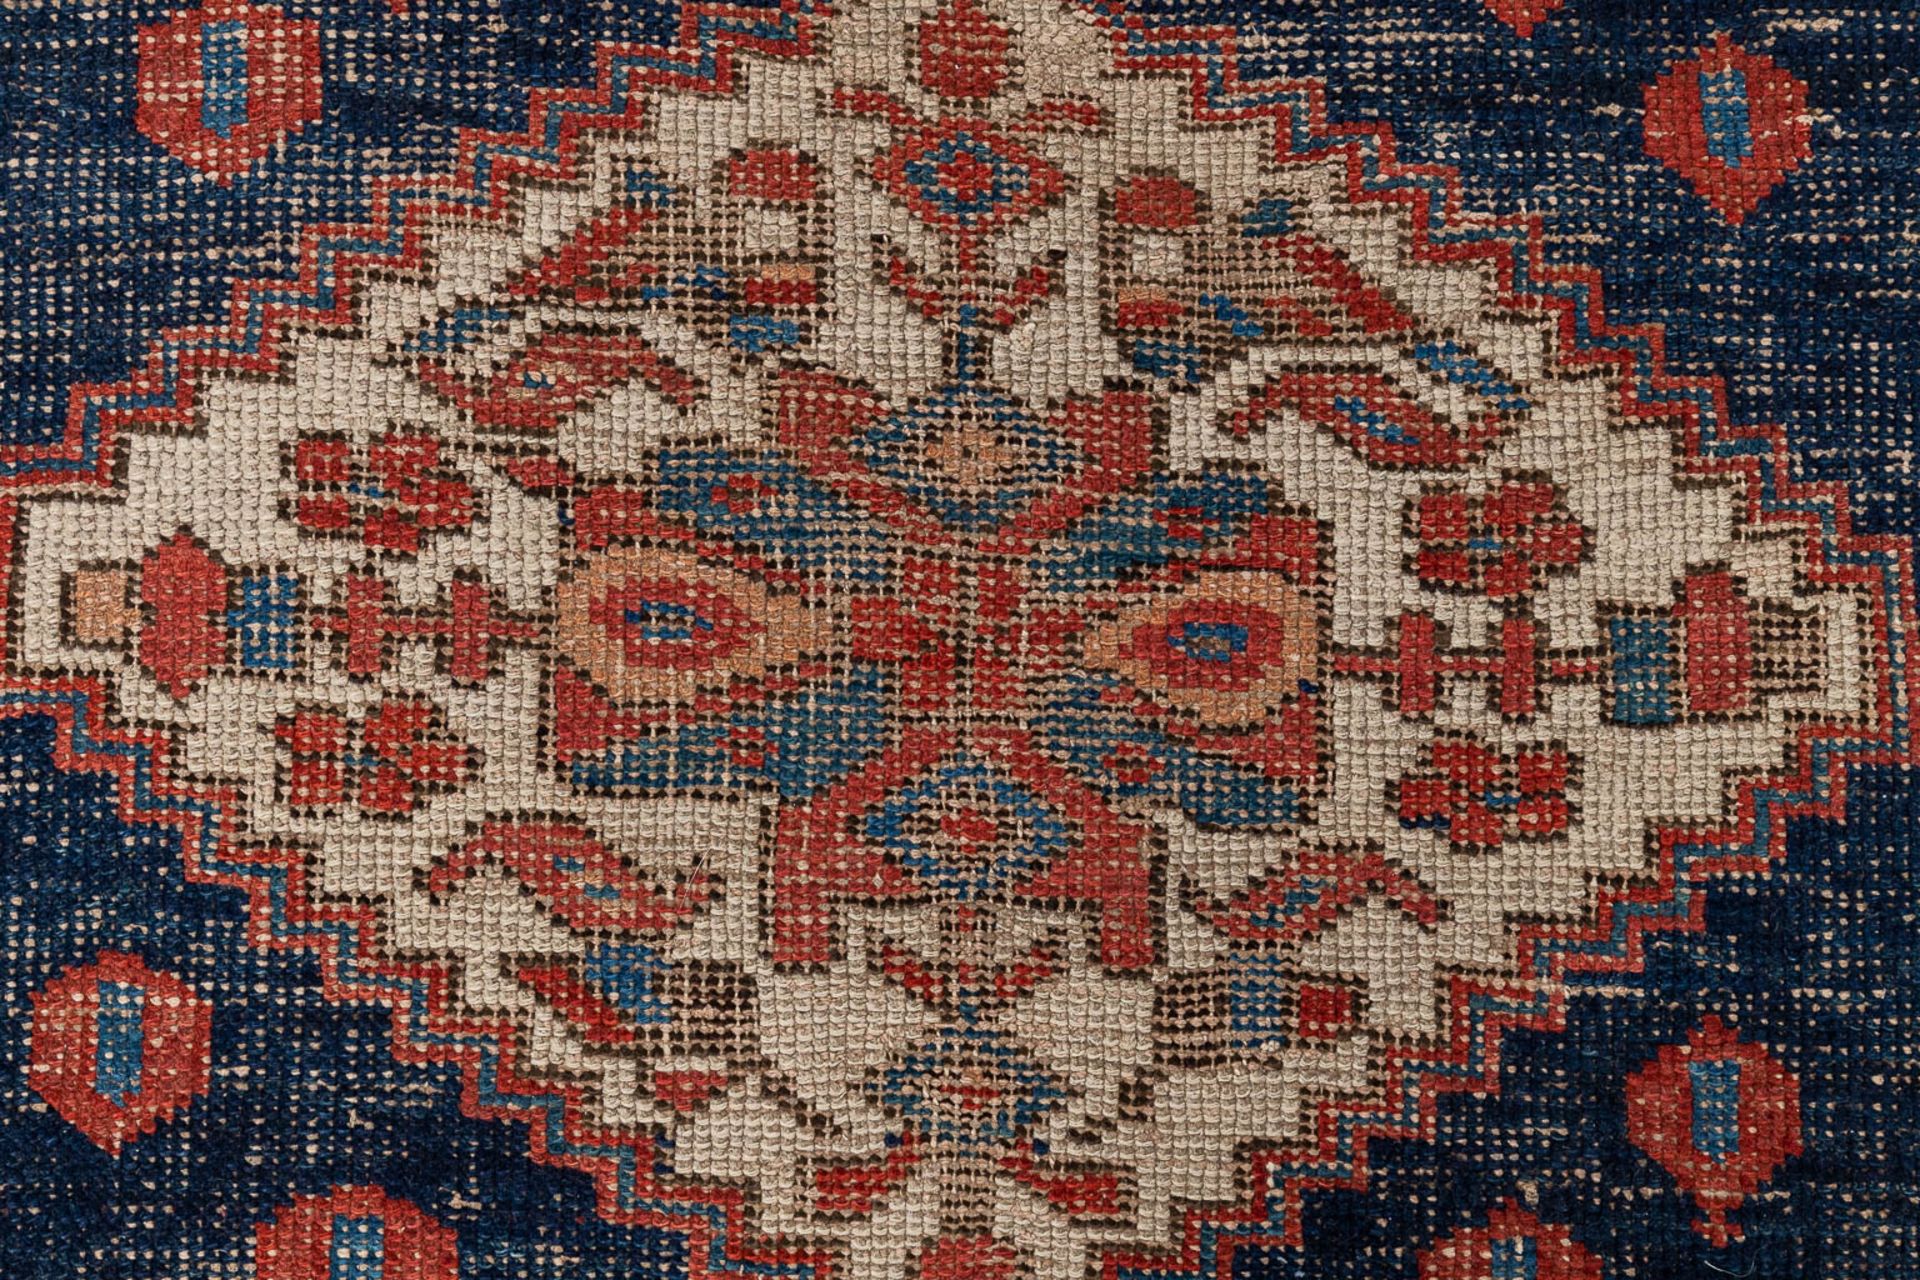 A collection of 2 Oriental hand-made carpets. Probably Caucasian. (L: 277 x W: 115 cm) - Image 4 of 12